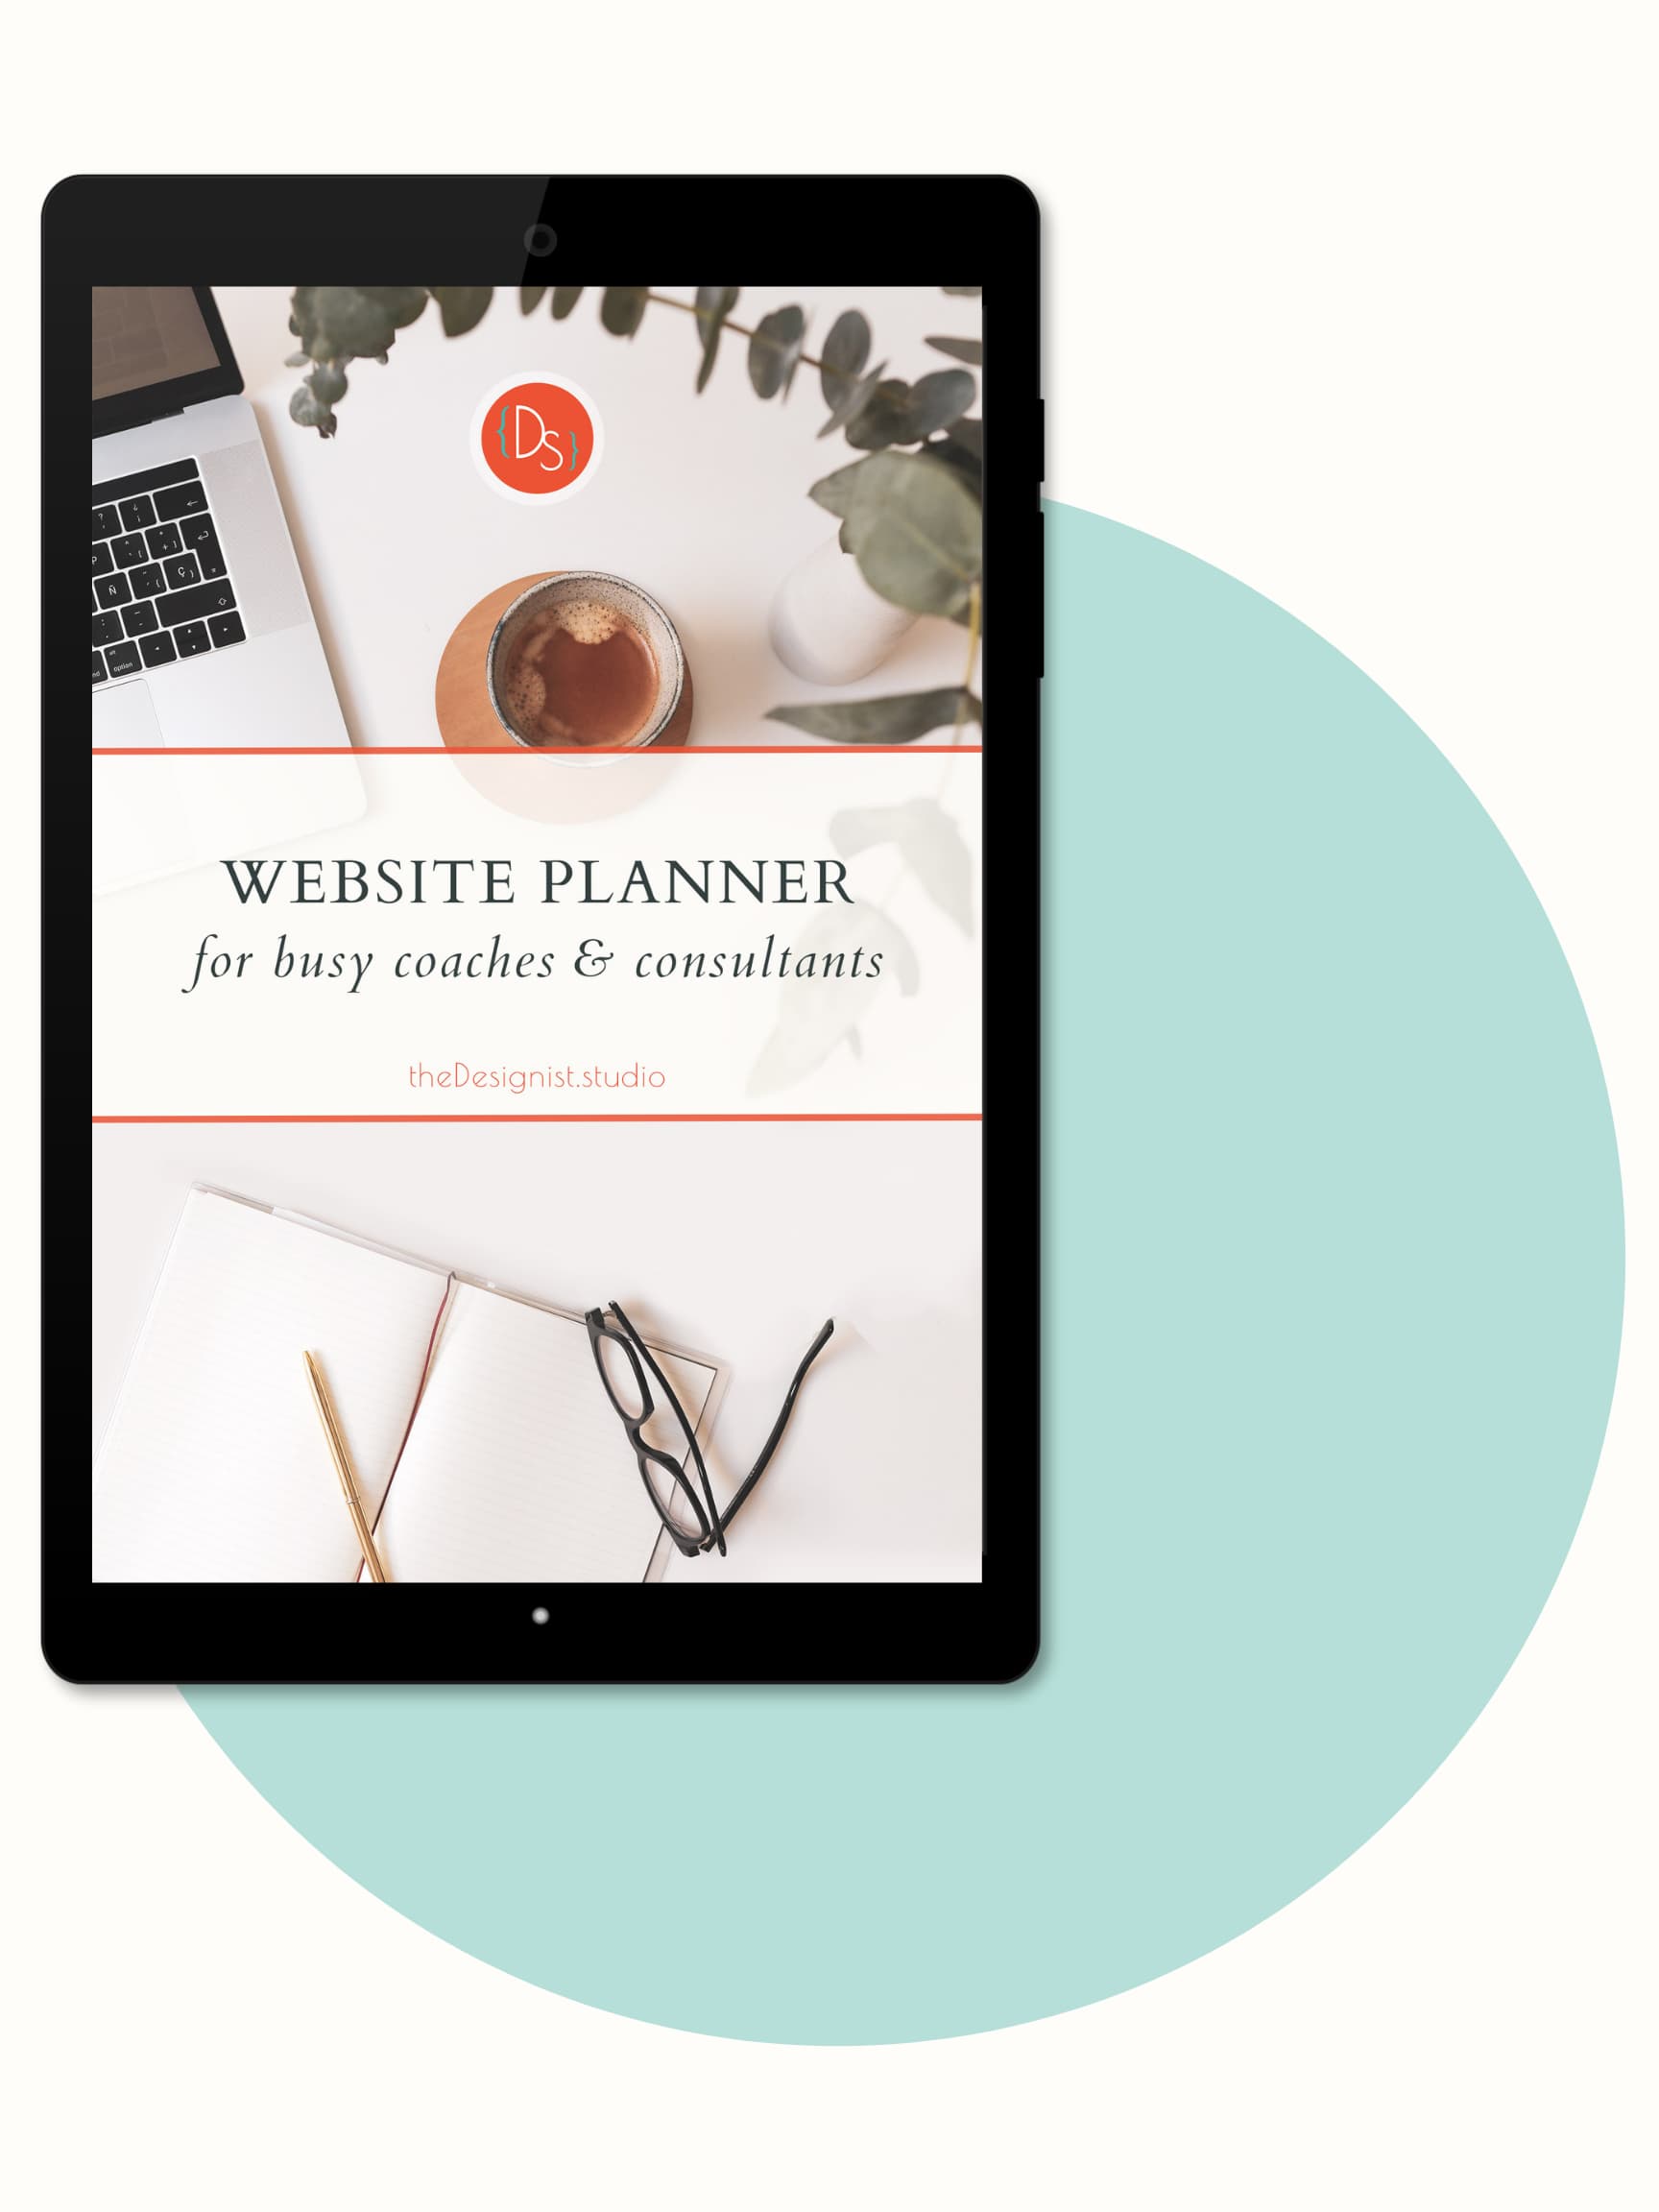 Tablet screen shows the cover of The Designist Studio's Essential Website Planner